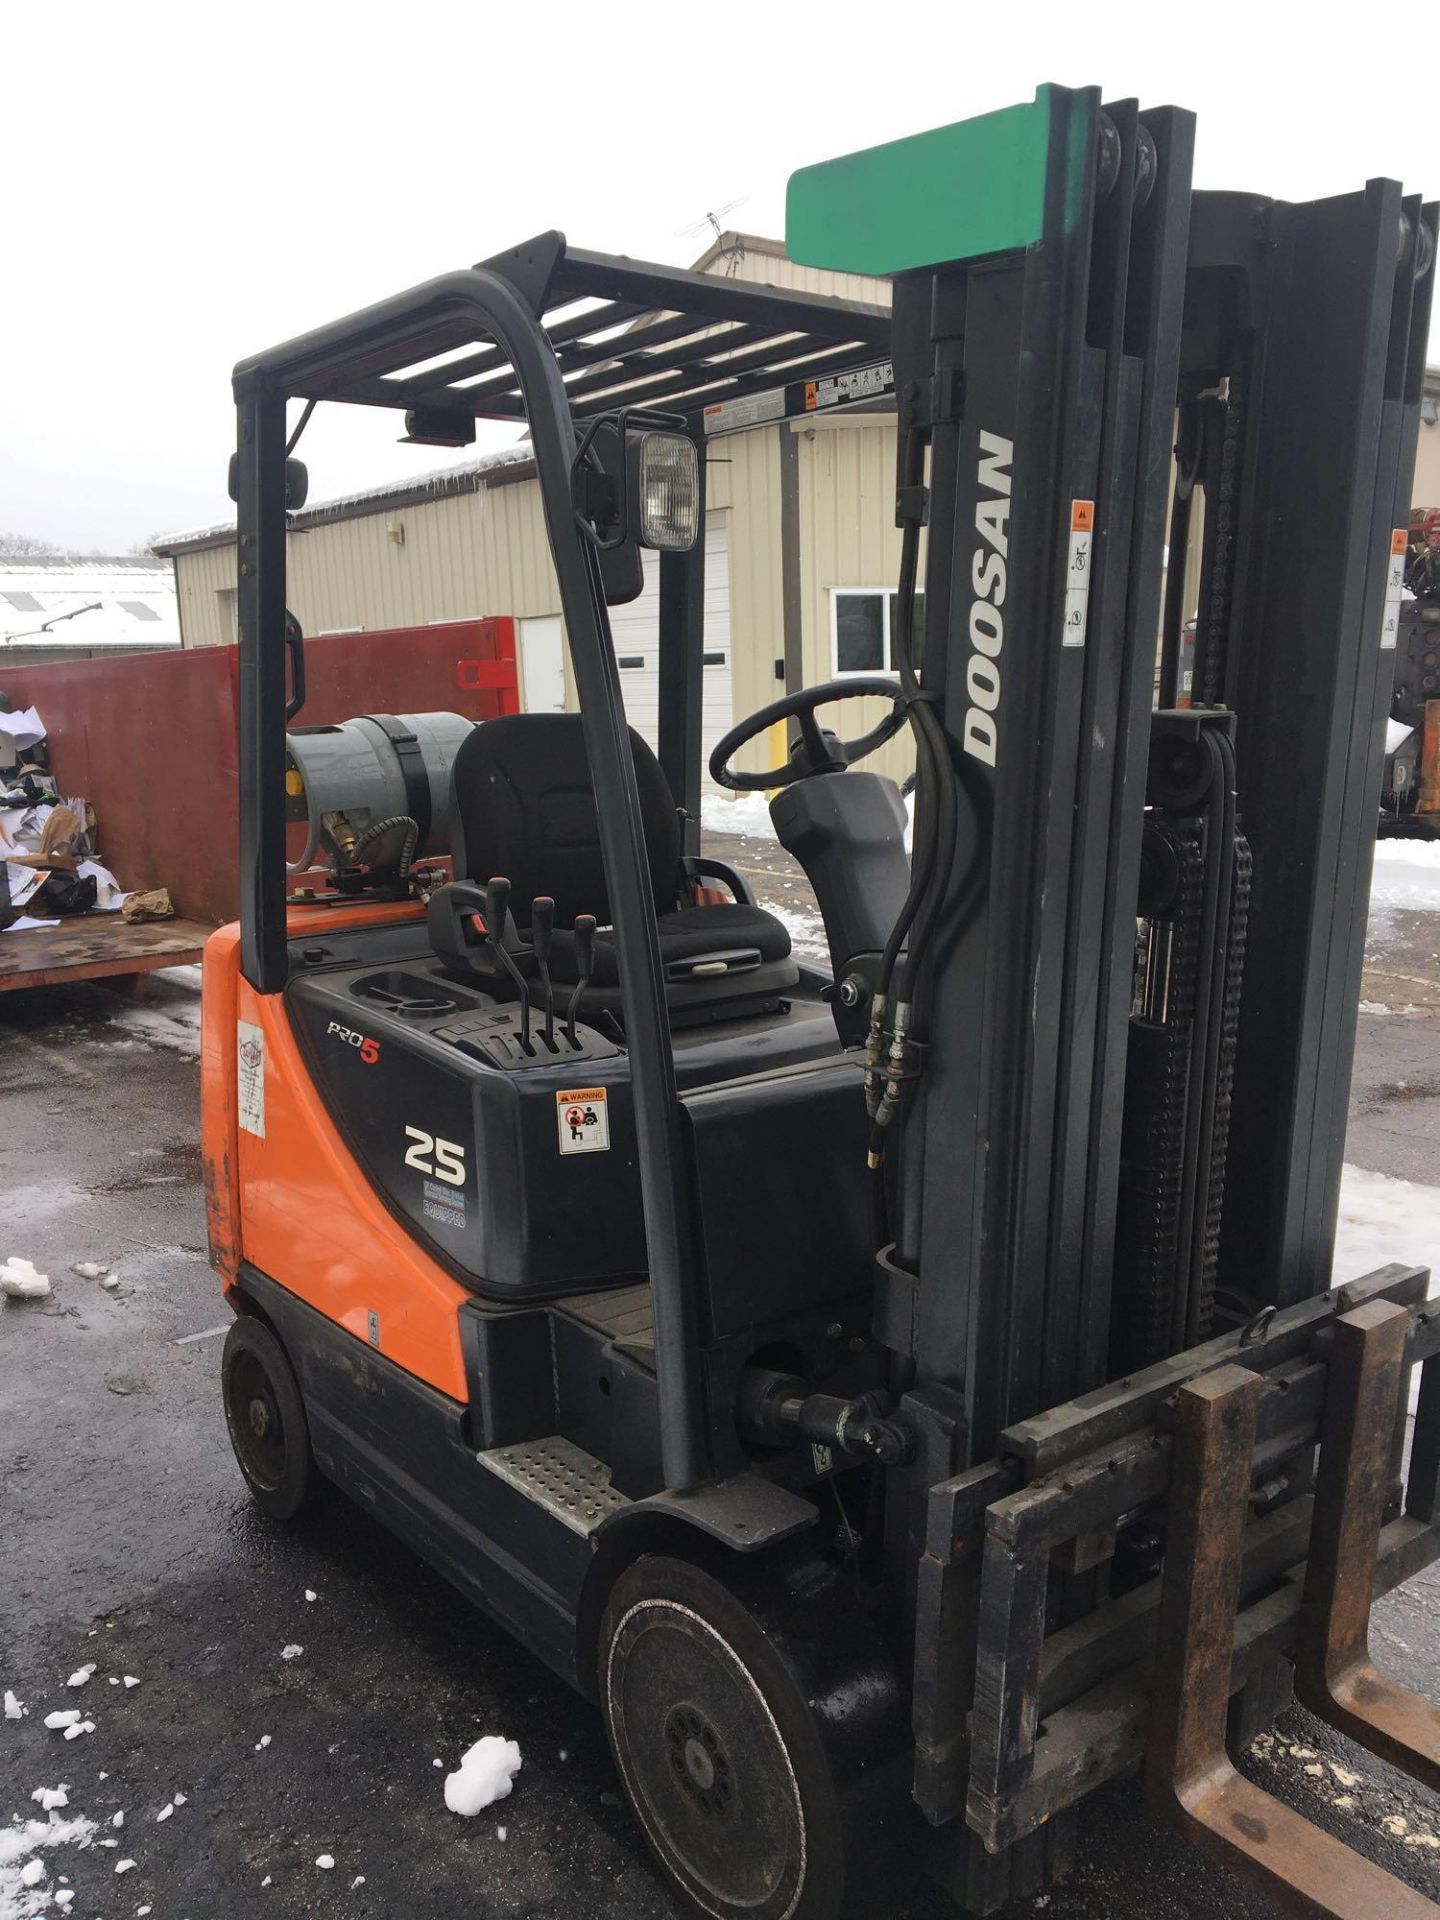 Propane Forklift, Doosan, GC25P-5, Max Ht 189", Max Cap 4300lbs, Hrs 3081 Started and Moved - Image 7 of 11